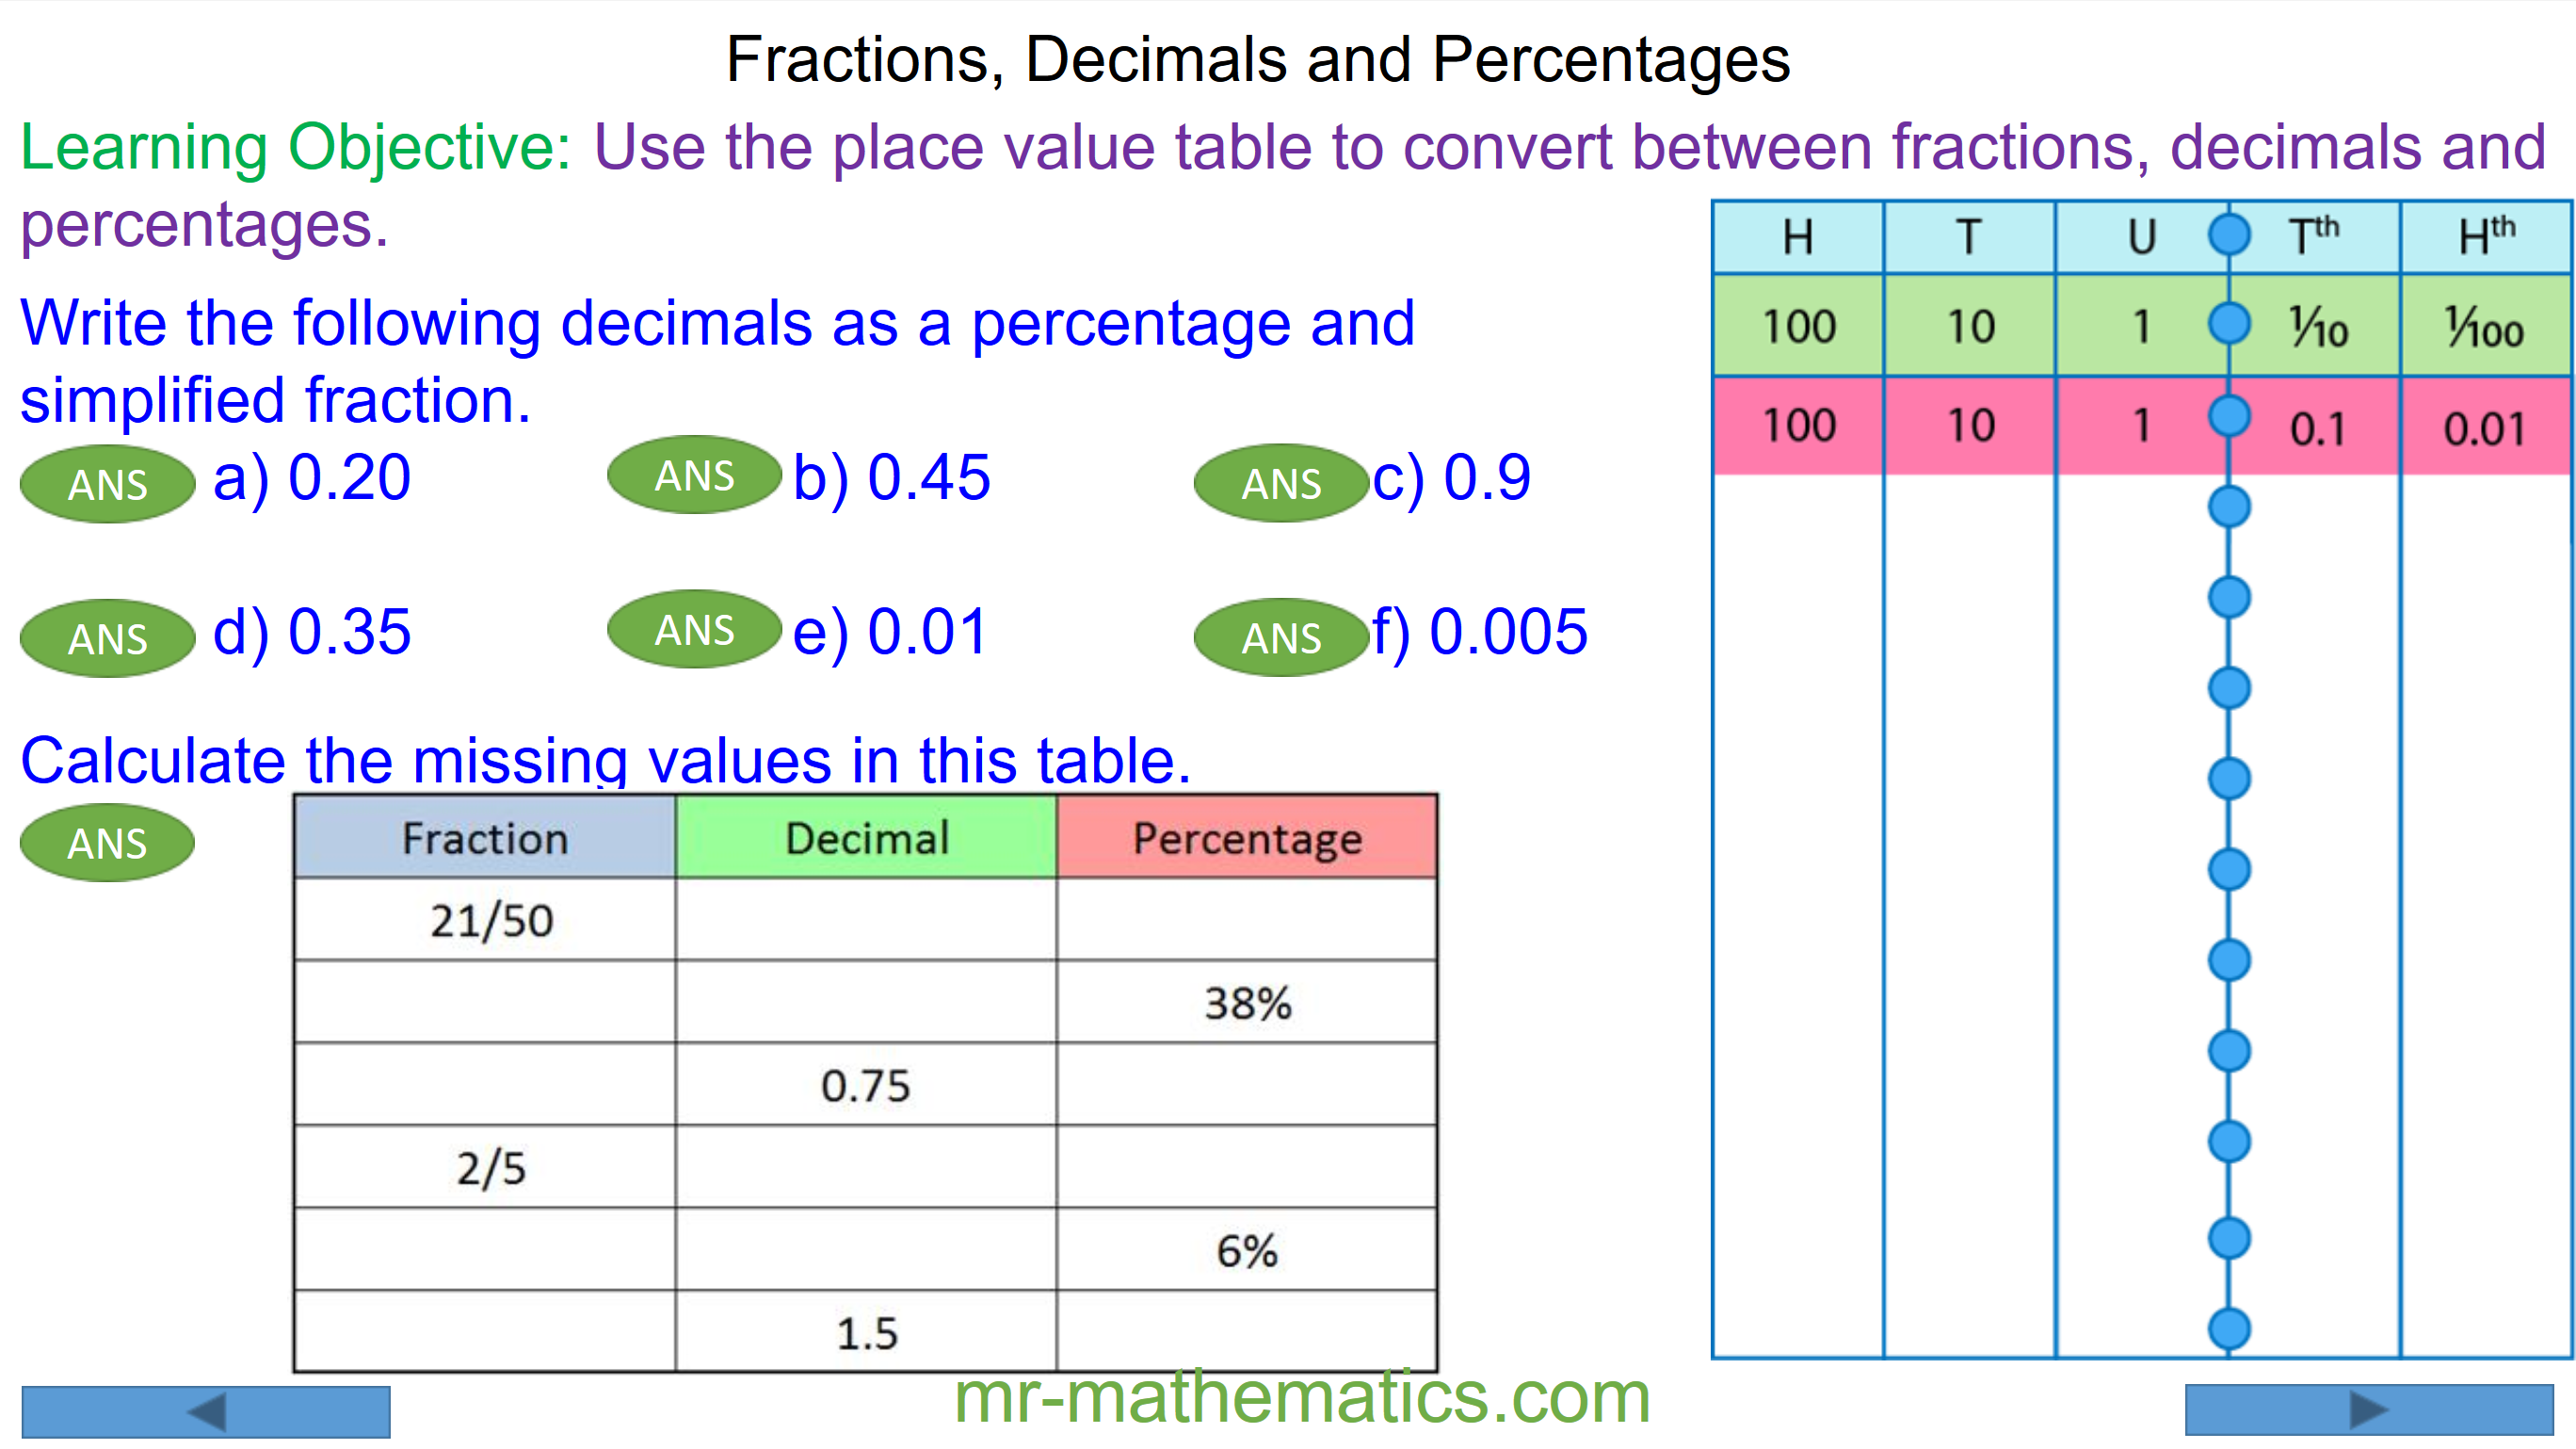 fraction-to-decimal-percent-conversion-table-awesome-home